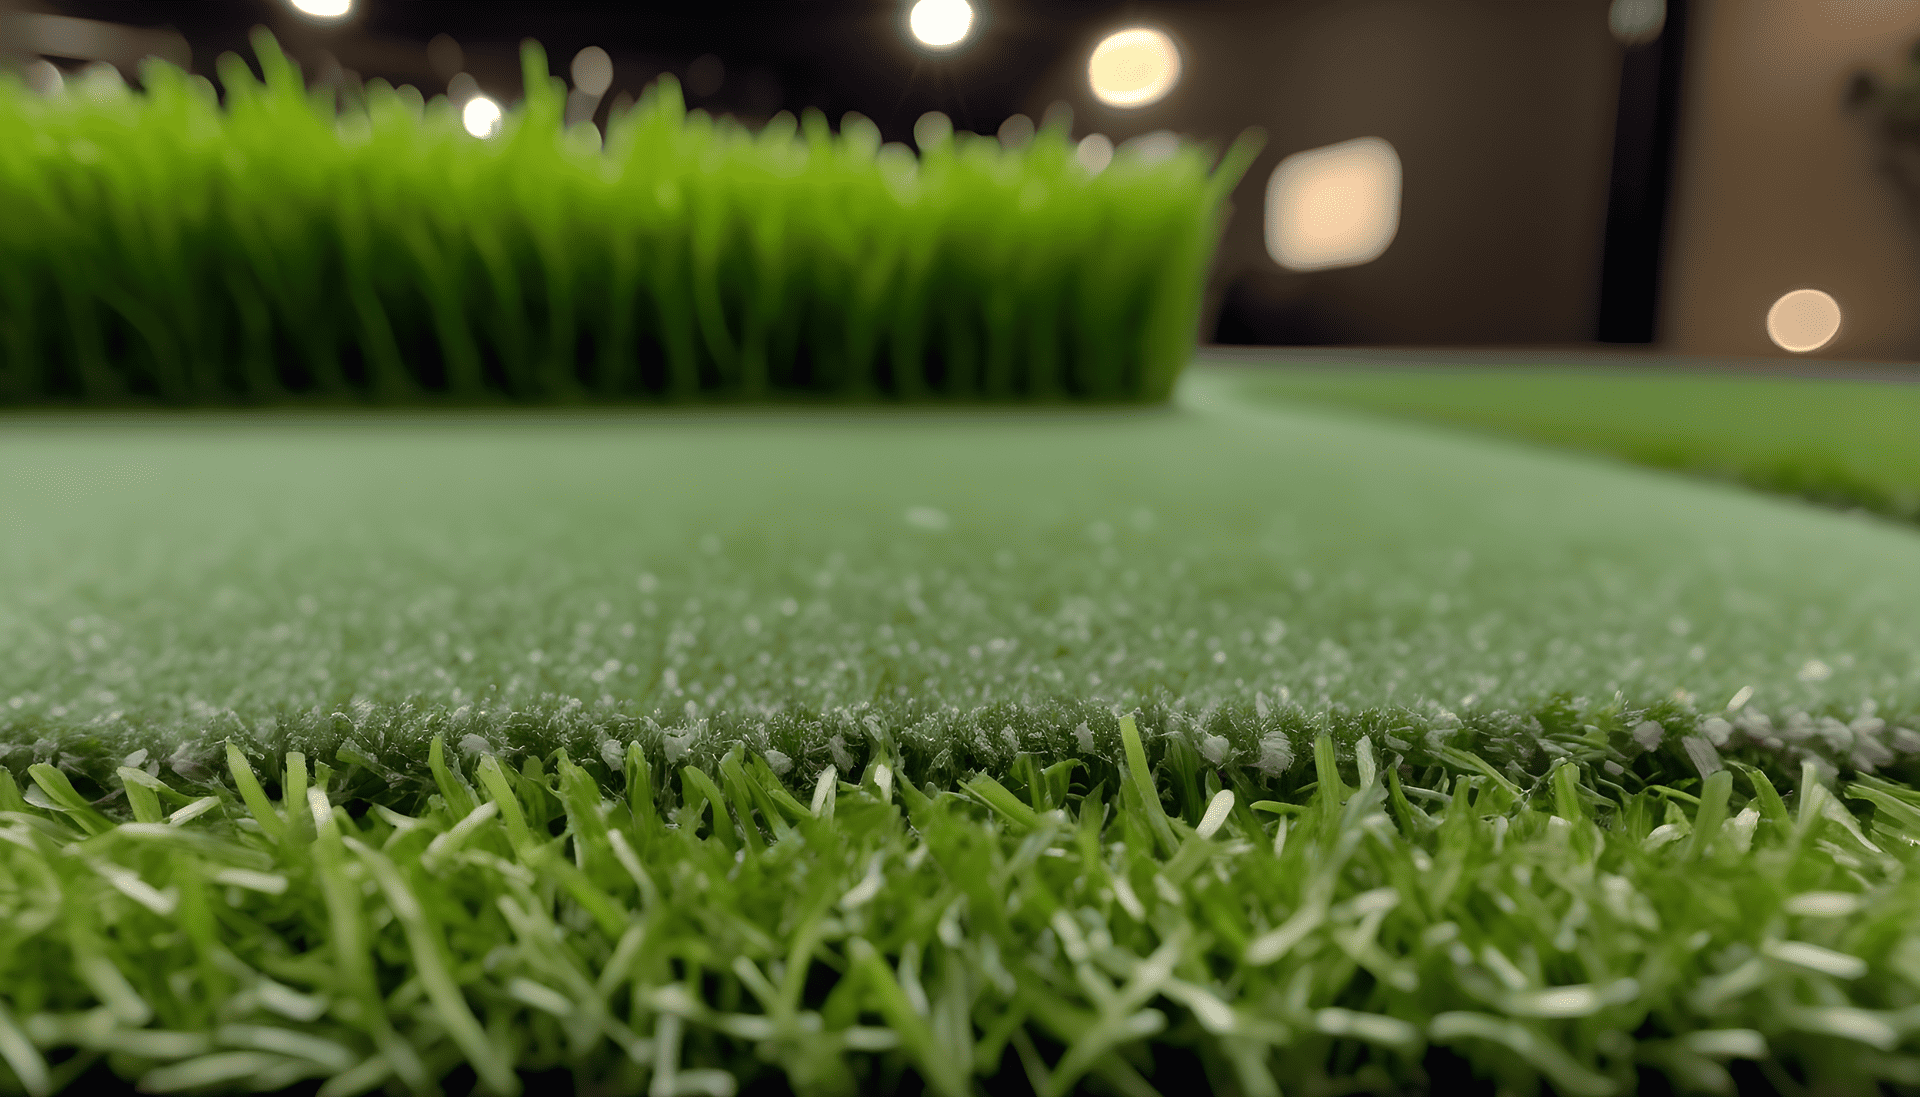 Different pile heights of artificial grass